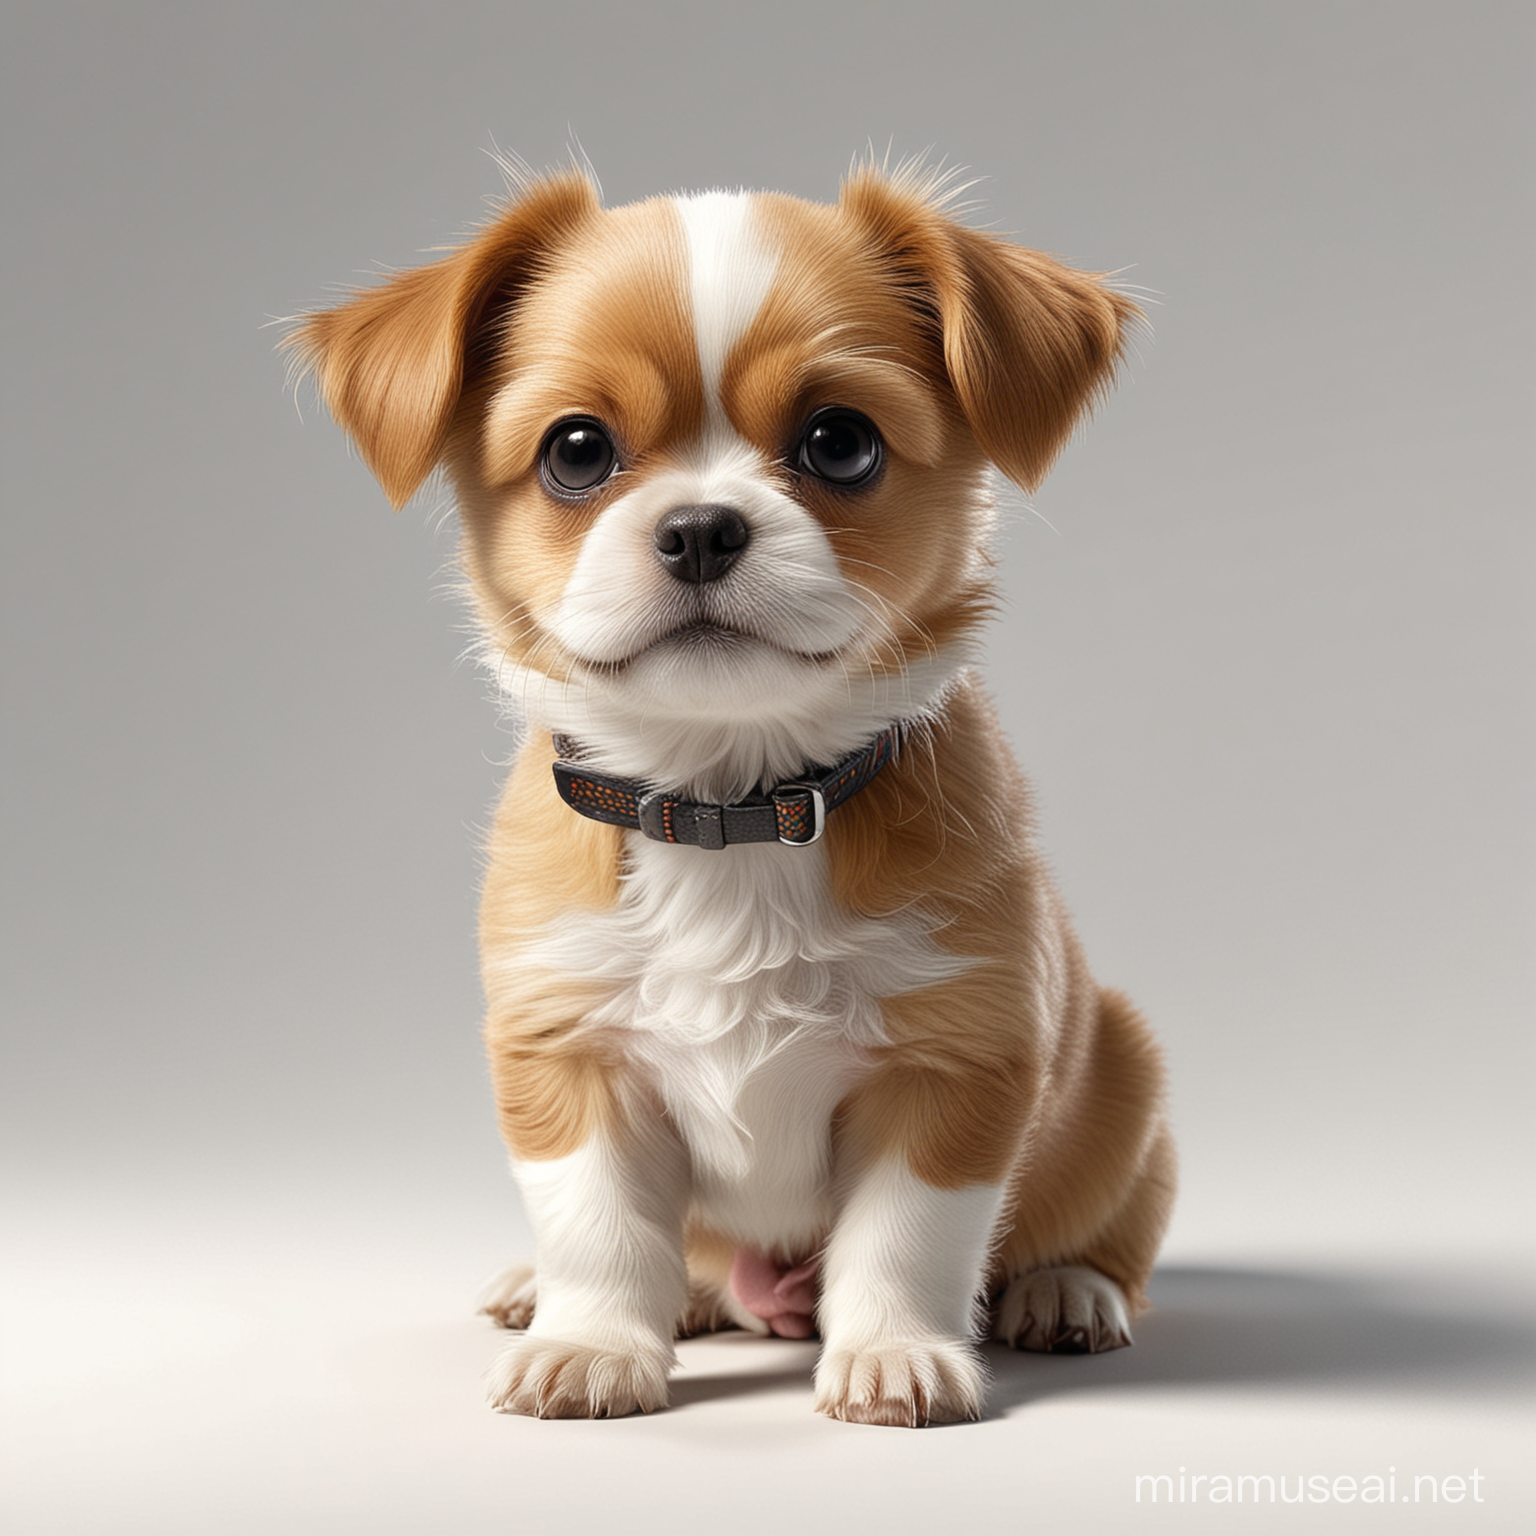 Hyper Realistic Small Dog Sitting Up in a Studio Setting